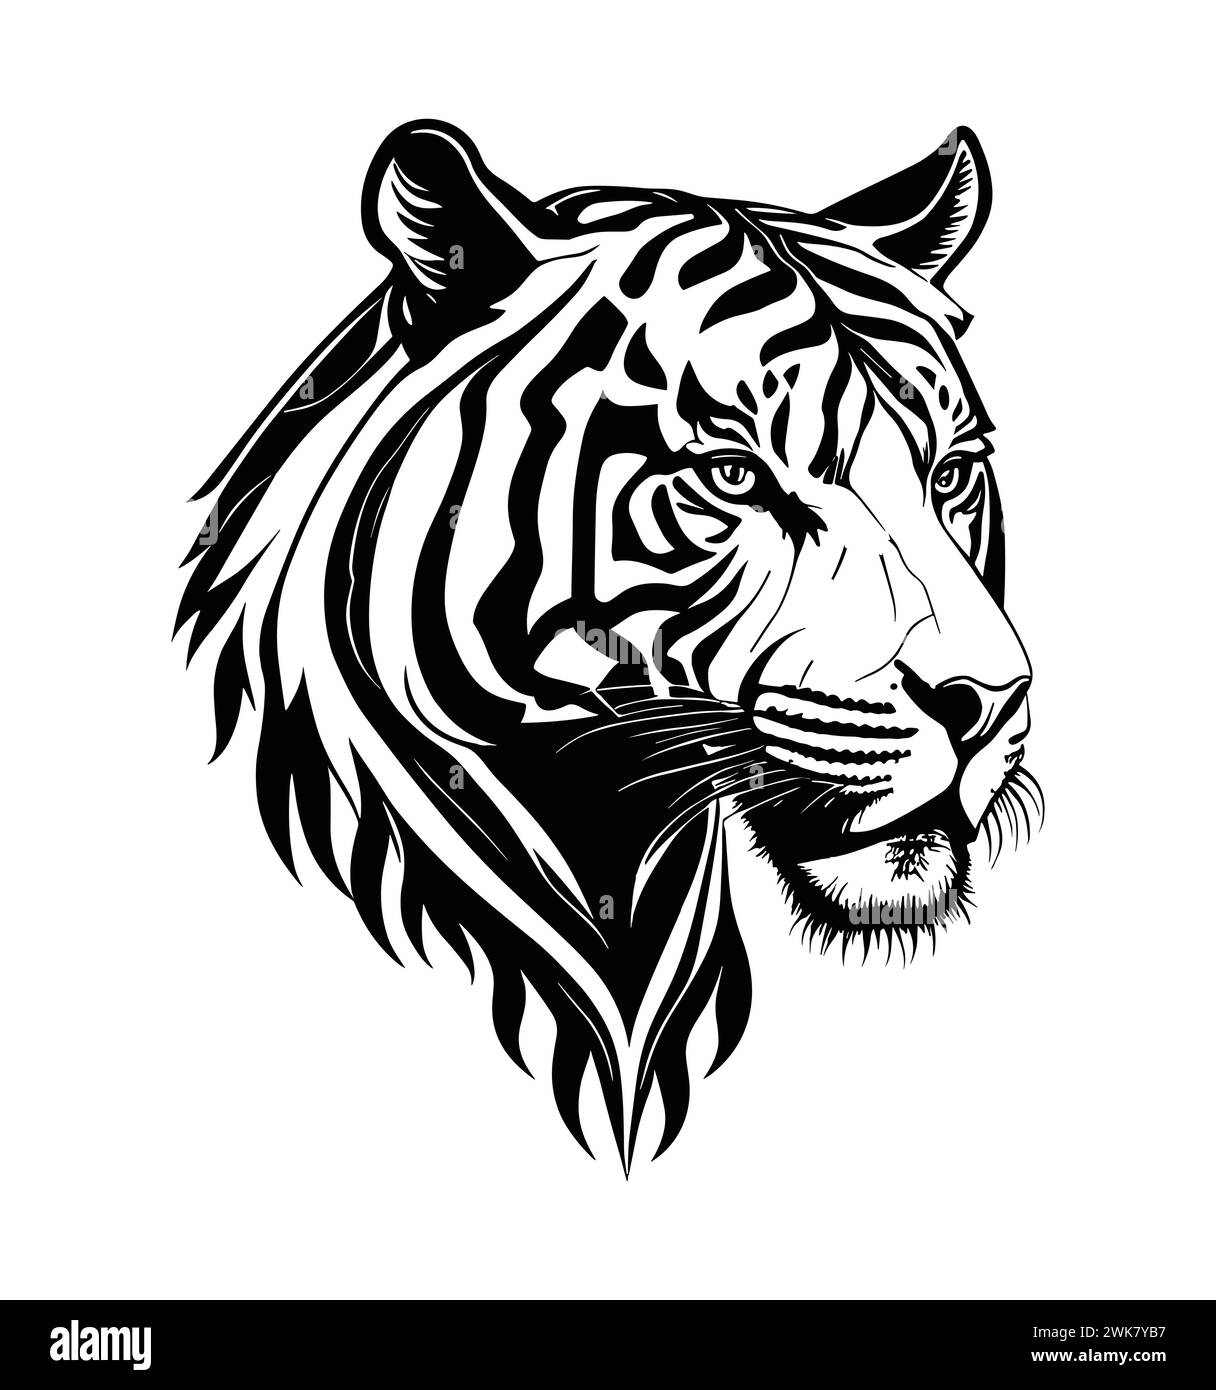 Tiger head black and white line art drawing. Stock Vector